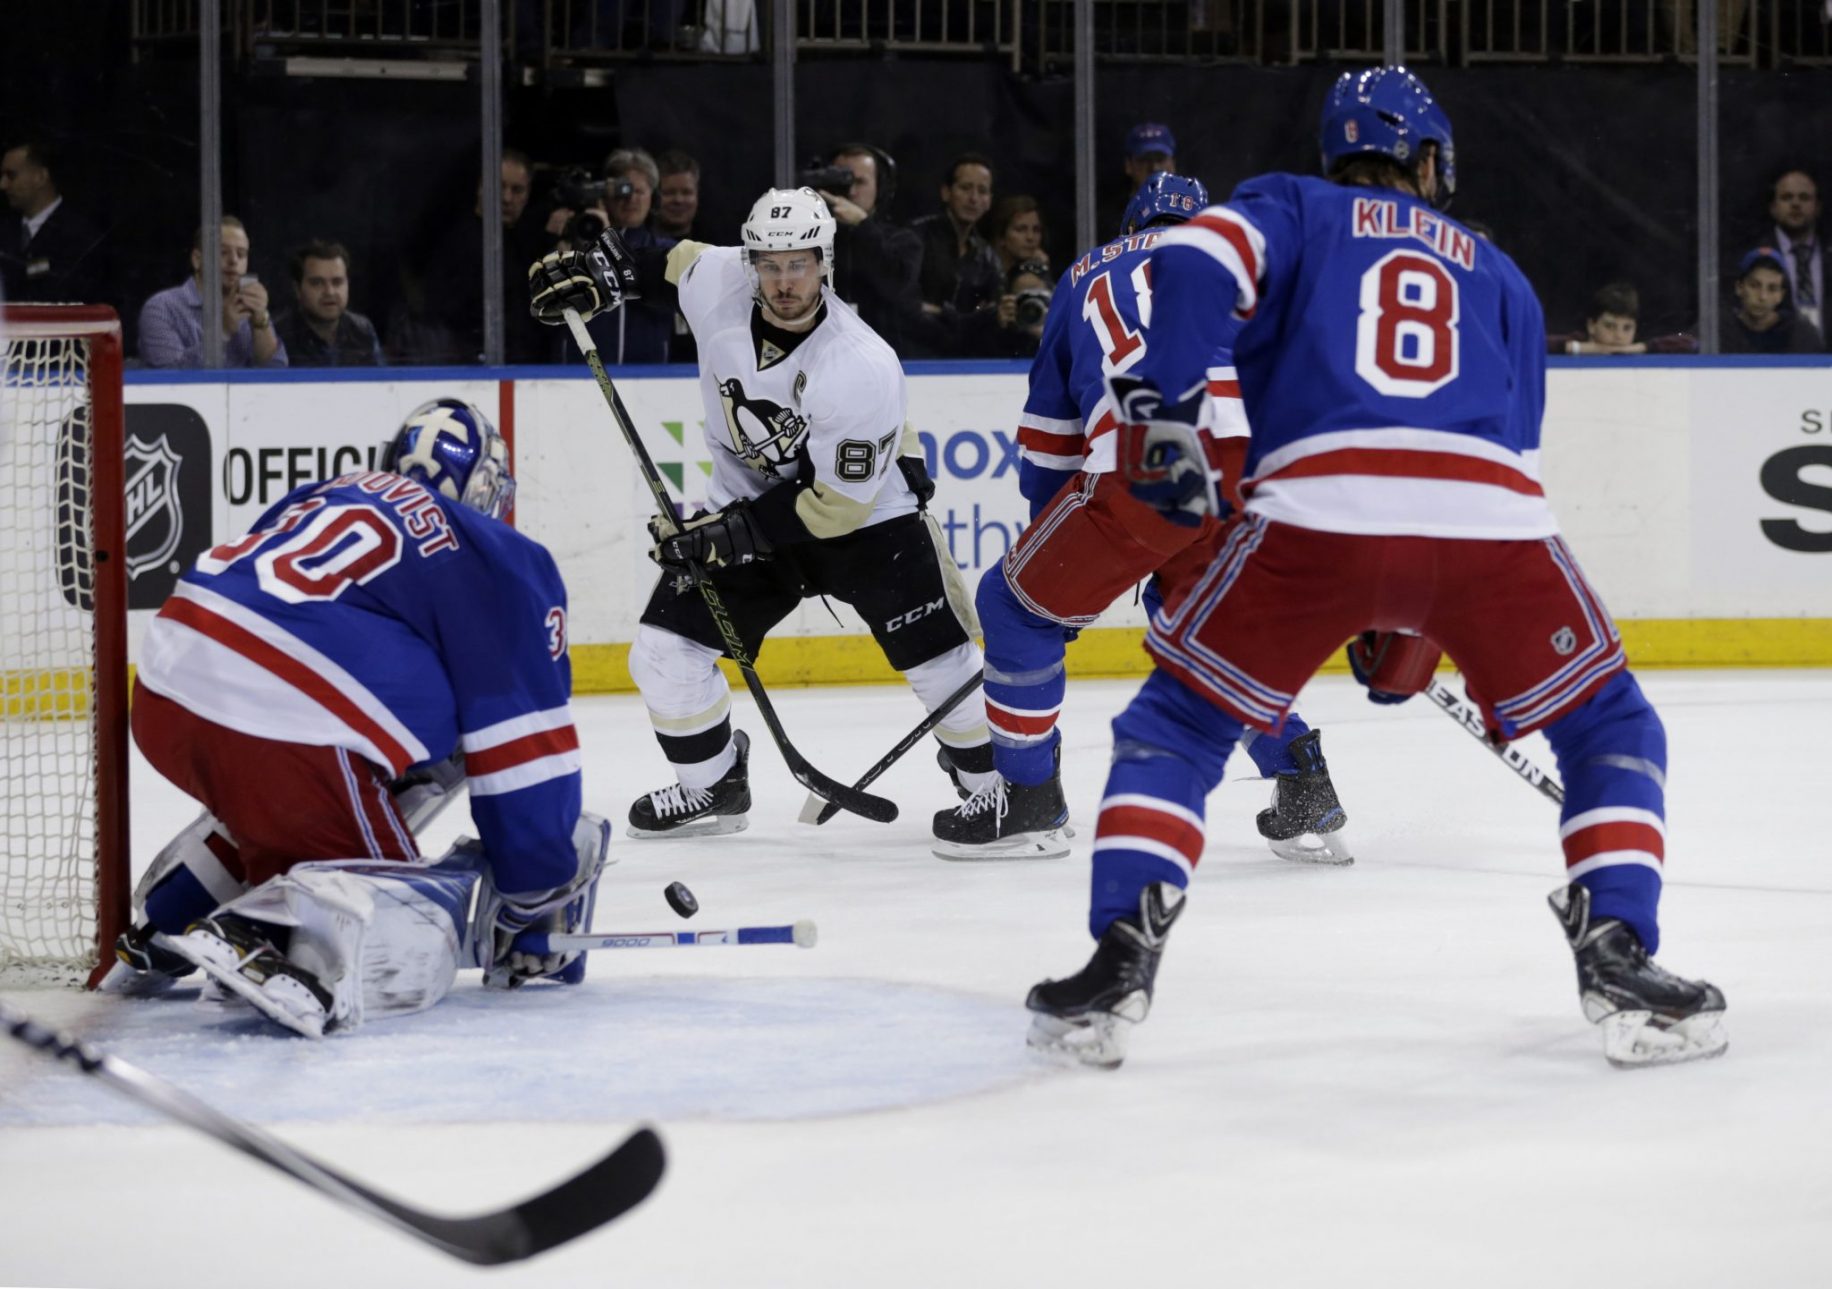 New York Rangers Roundup, 3/31/17: Pittsburgh Penguins at MSG, J.T. Miller Speaks About 4th-Line 